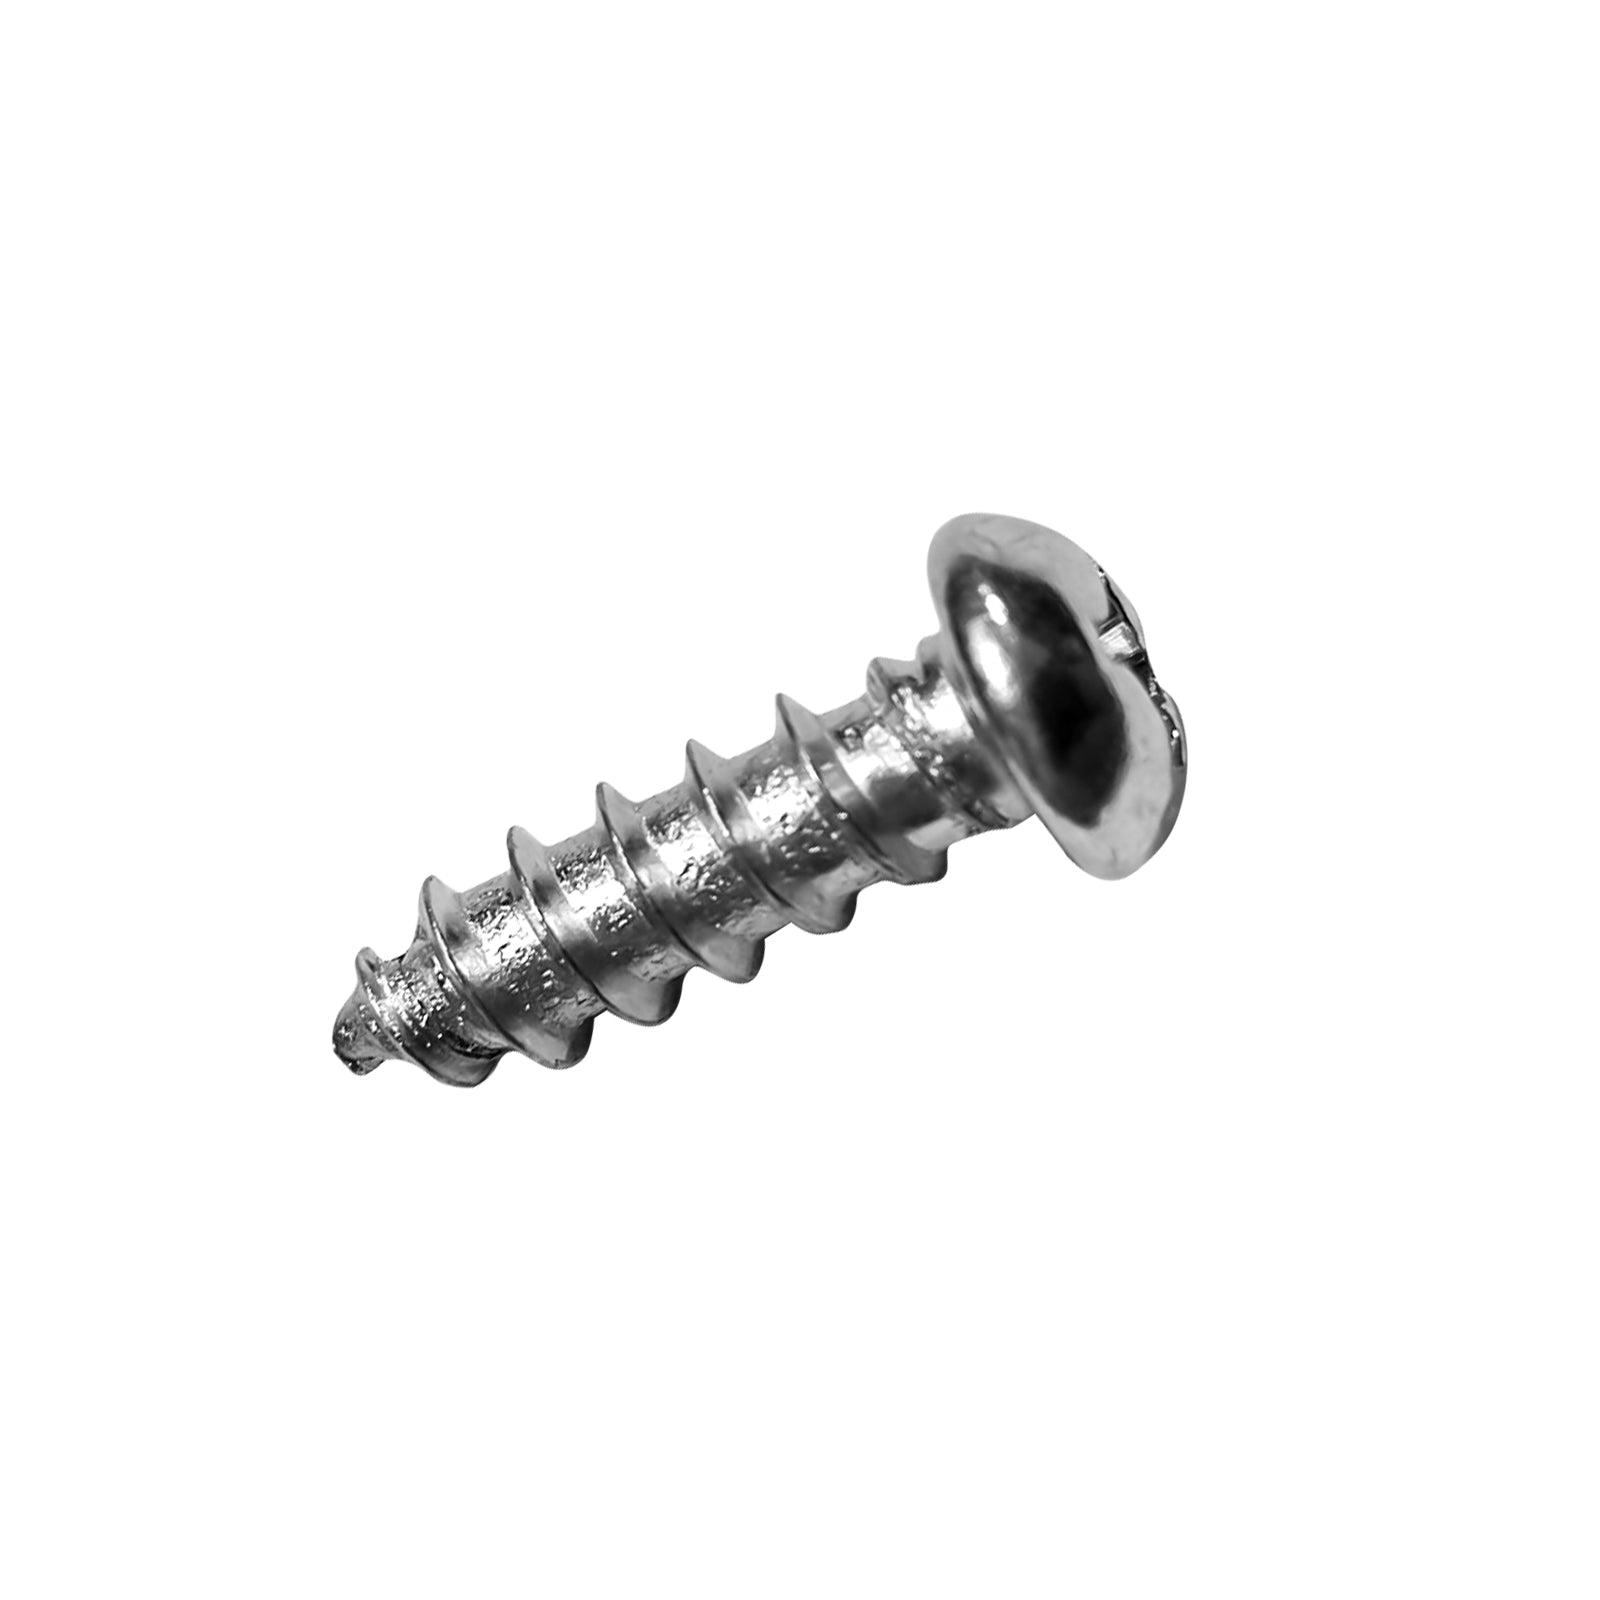 PowerSmart Lawn Mower Parts - Self-tapping screw, Stock #: 303010216